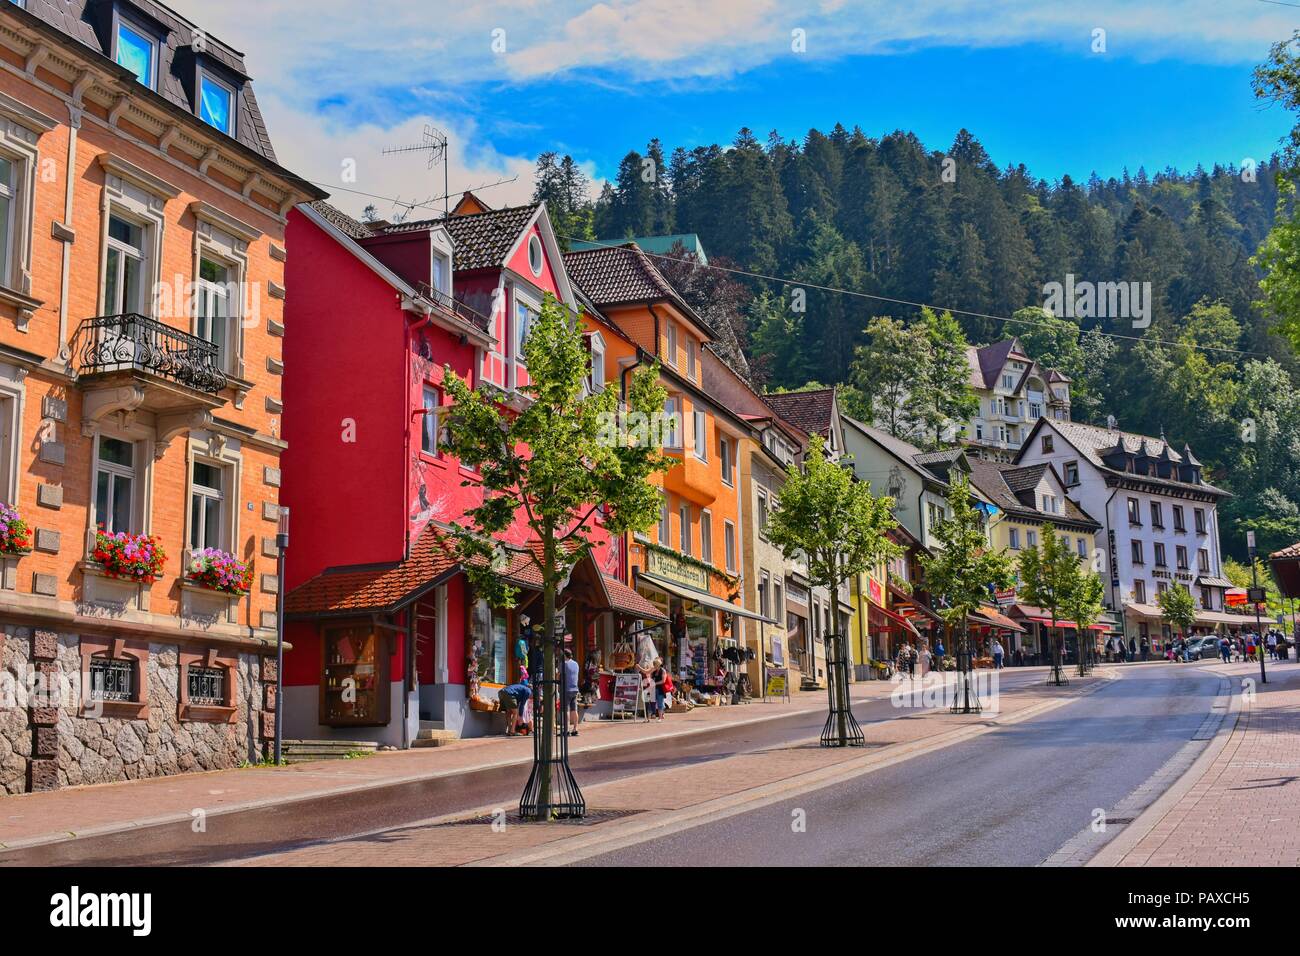 Triberg, Schwarzwald-Baar District, Germany - July 15, 2018: Colorful houses in the street of Triberg. Triberg is known for their waterfalls and cuckoo clocks. Stock Photo